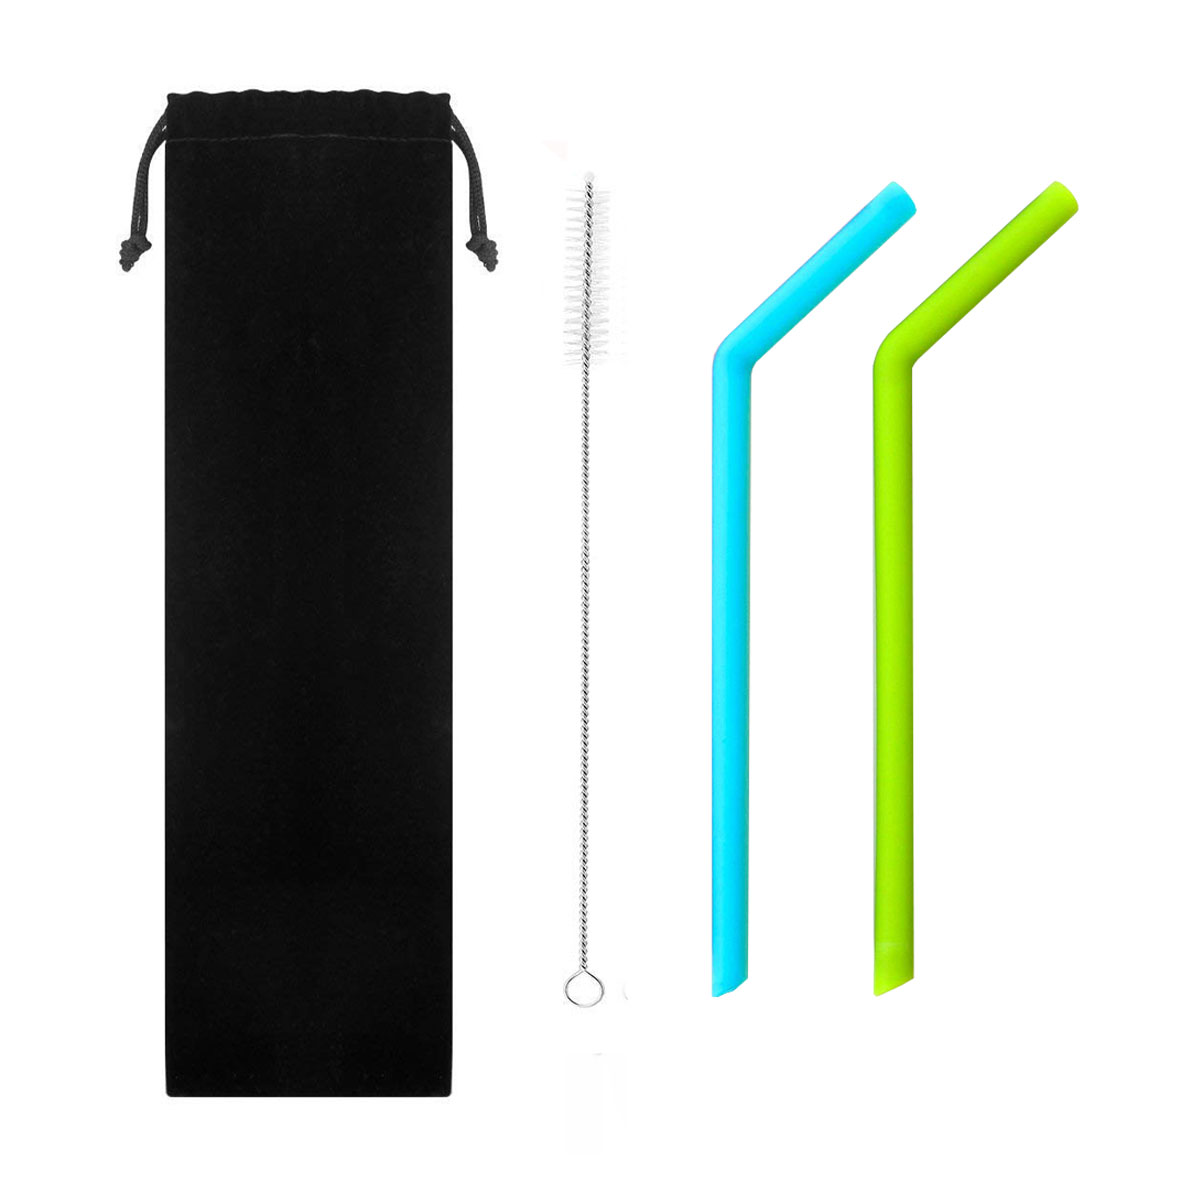 GL-AAJ1097 3 in 1 Drinking Silicone Straws Set with Cleaning Brush